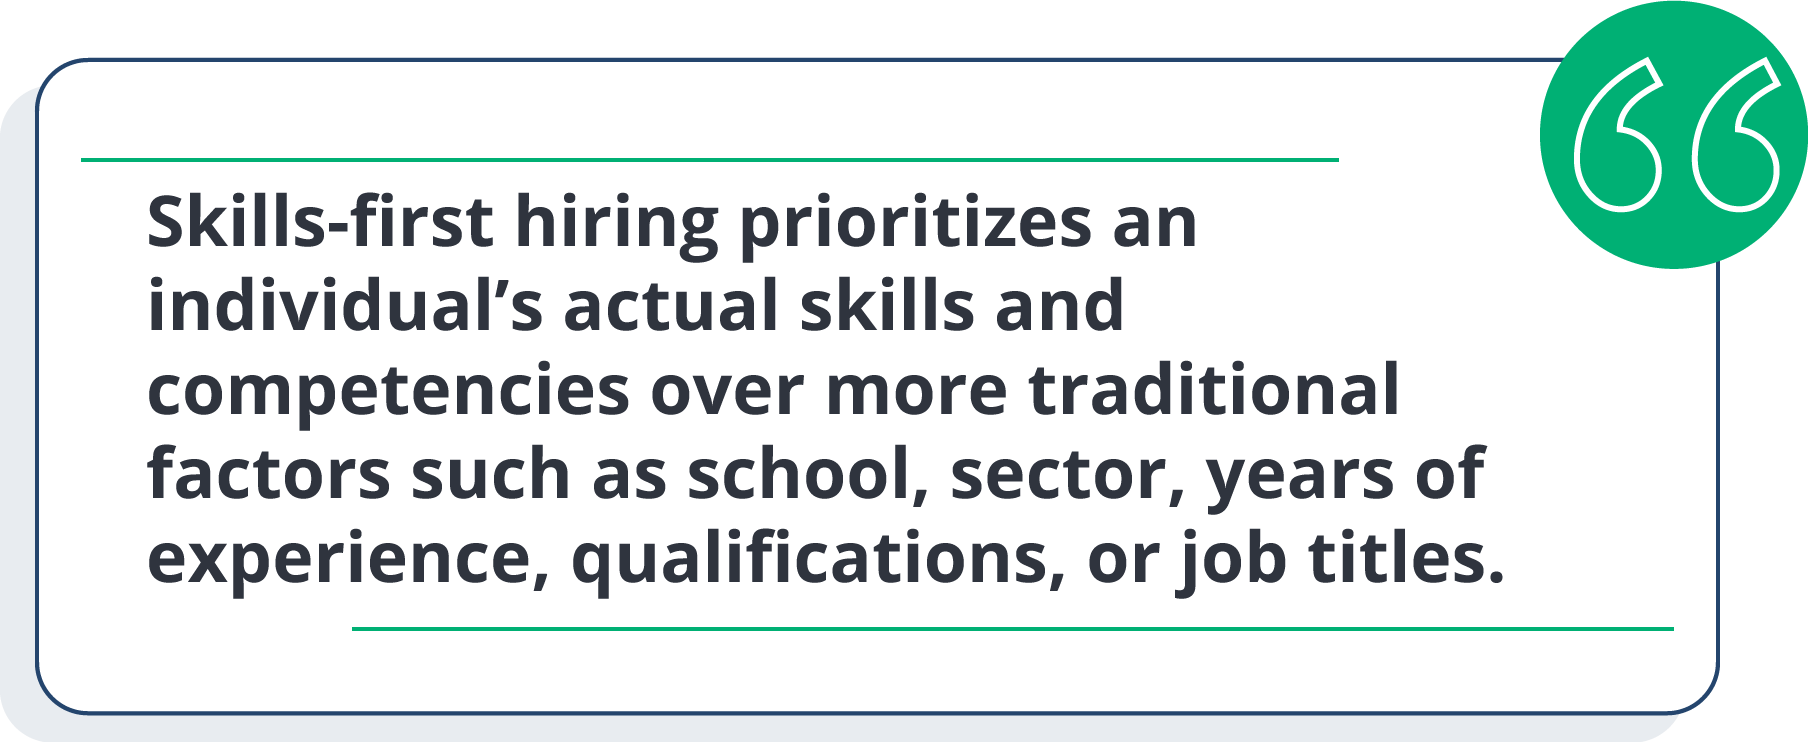 Skills-first hiring prioritizes an individual’s actual skills and competencies over more traditional factors such as school, sector, years of experience, qualifications, or job titles. 